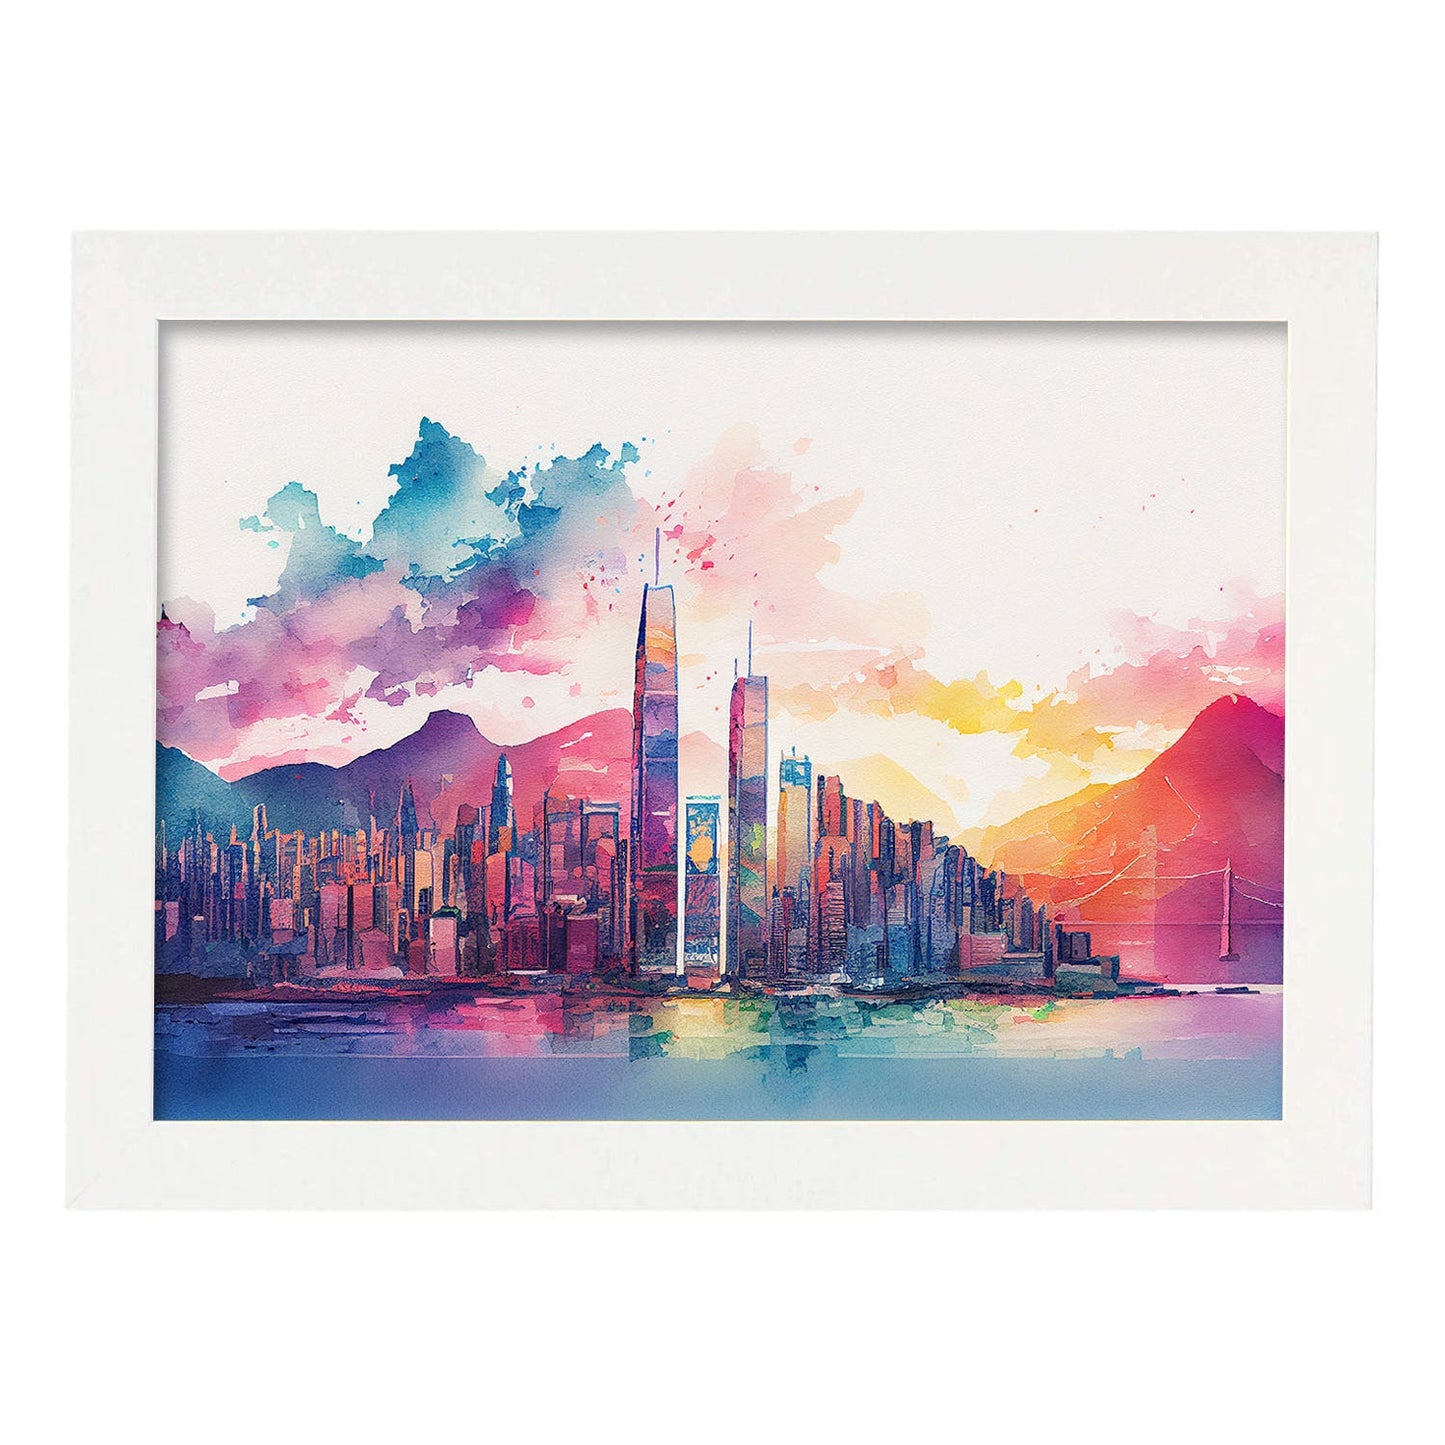 Nacnic watercolor of a skyline of the city of Hong Kong_3. Aesthetic Wall Art Prints for Bedroom or Living Room Design.-Artwork-Nacnic-A4-Marco Blanco-Nacnic Estudio SL